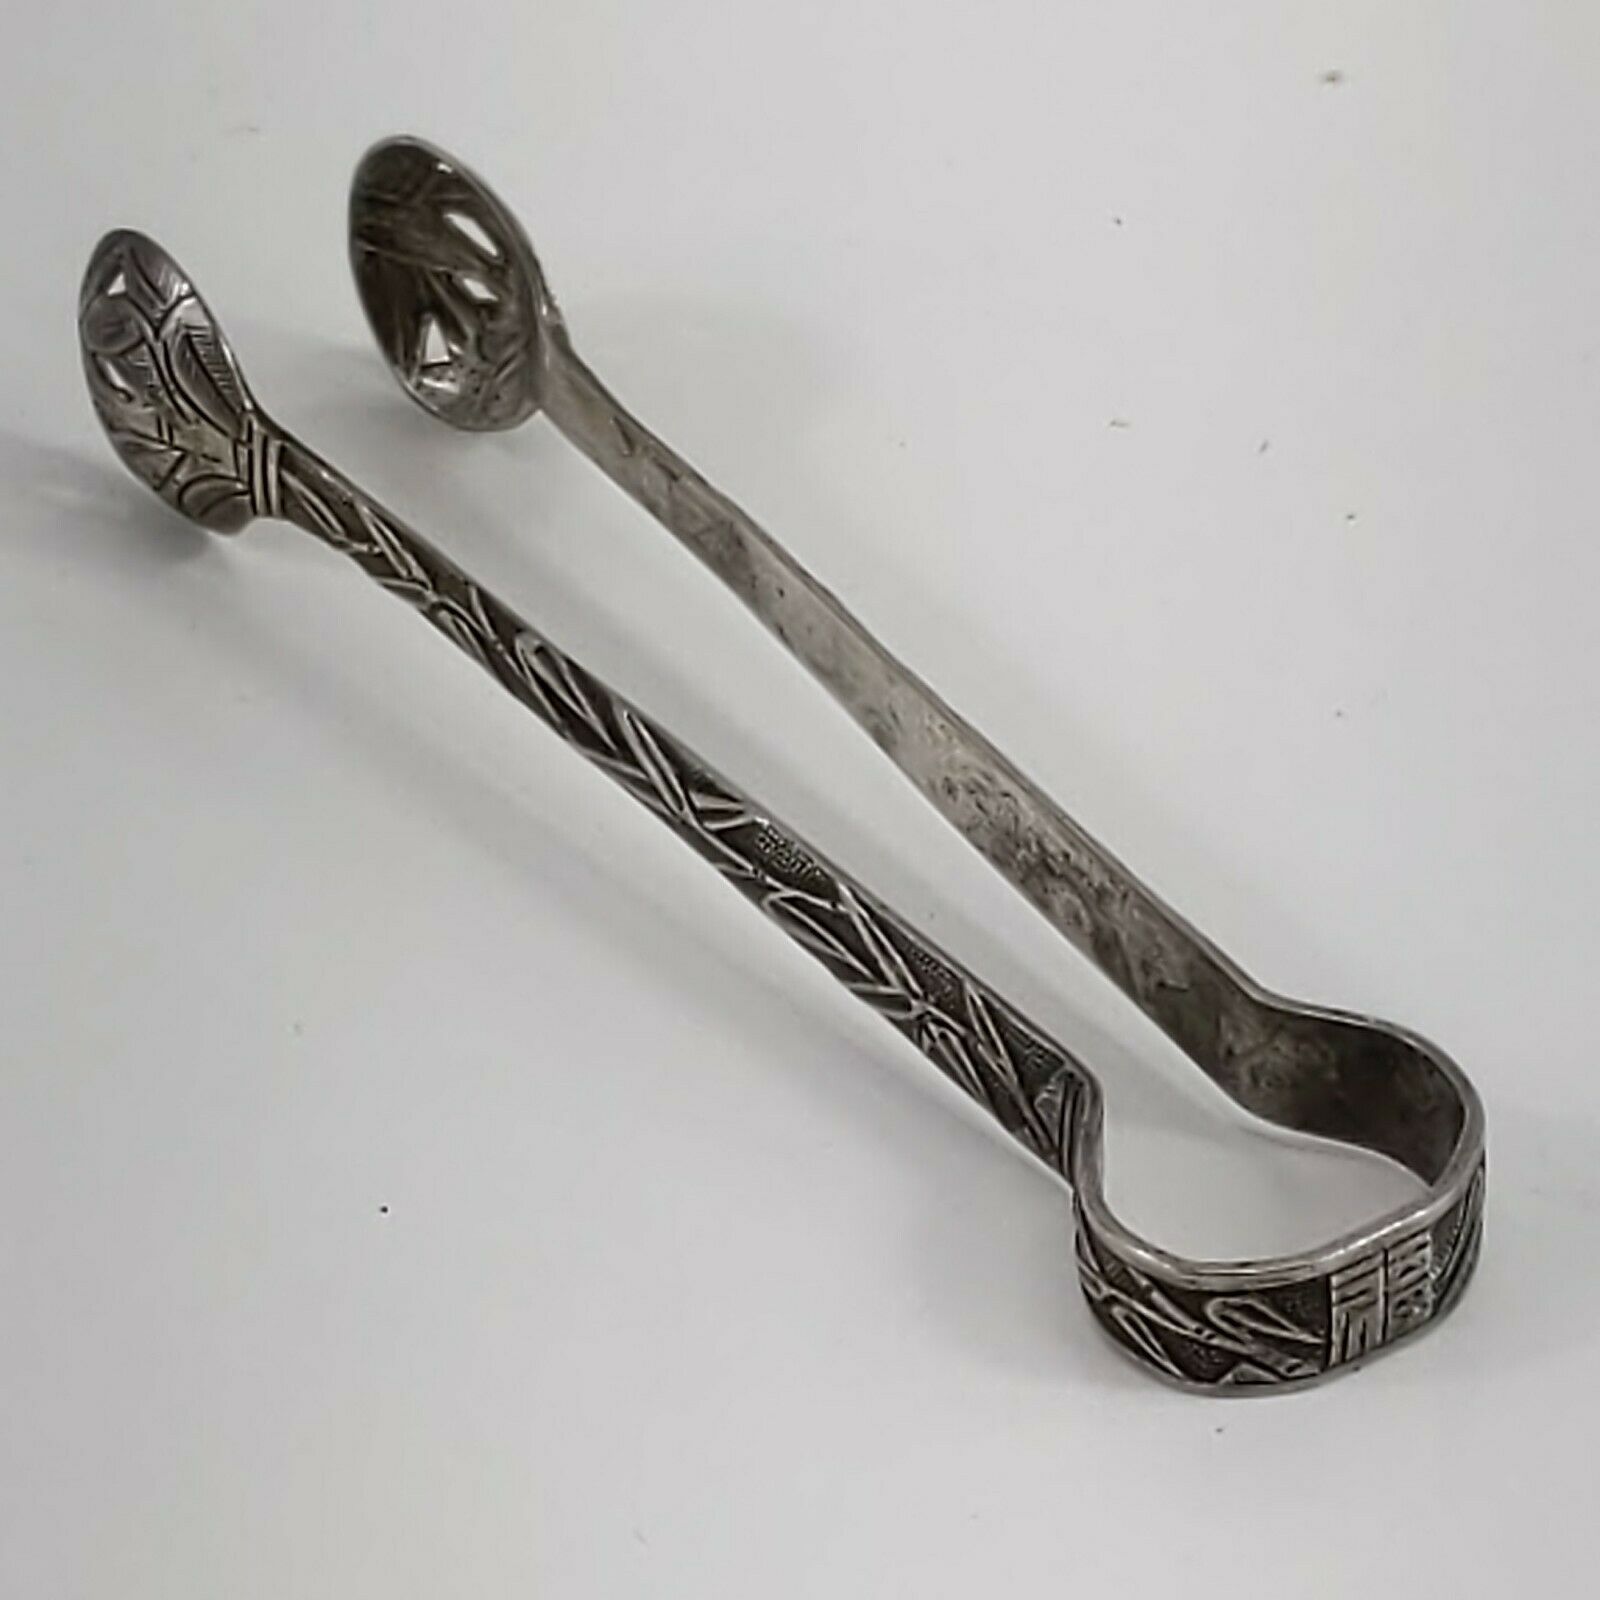 Antique Asian Import Sugar Tongs Bamboo Design Silver Tone (Sterling Silver?)